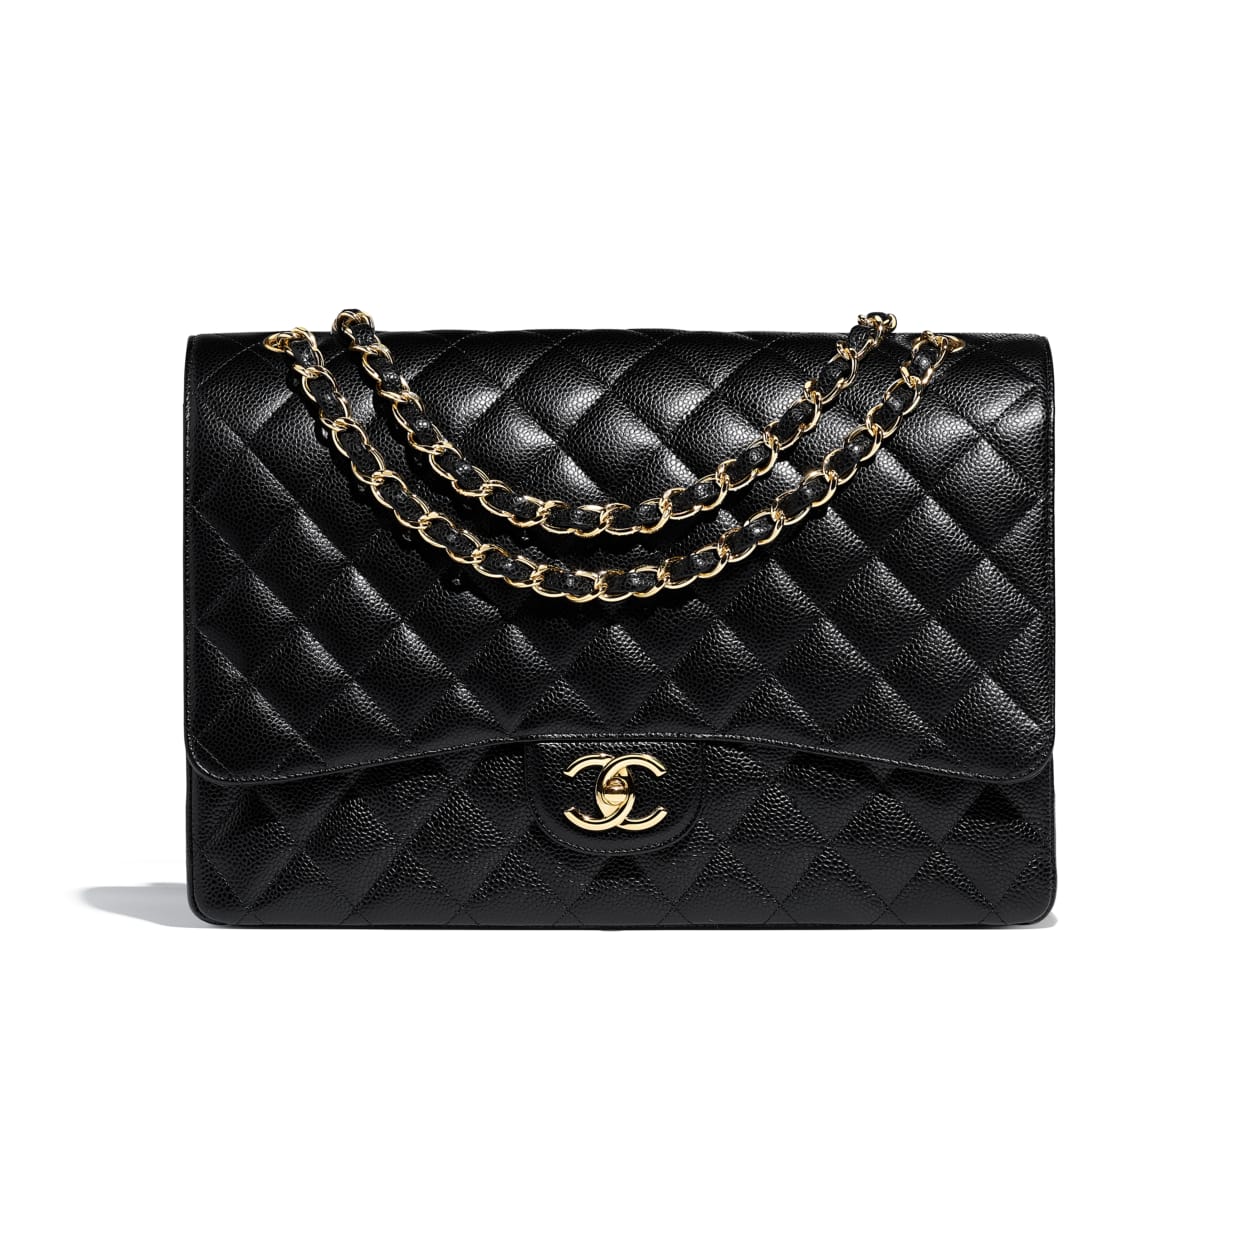 Pre Owned Chanel Bag Price  Buy Chanel Handbags Online Australia  PH  Luxury Consignment